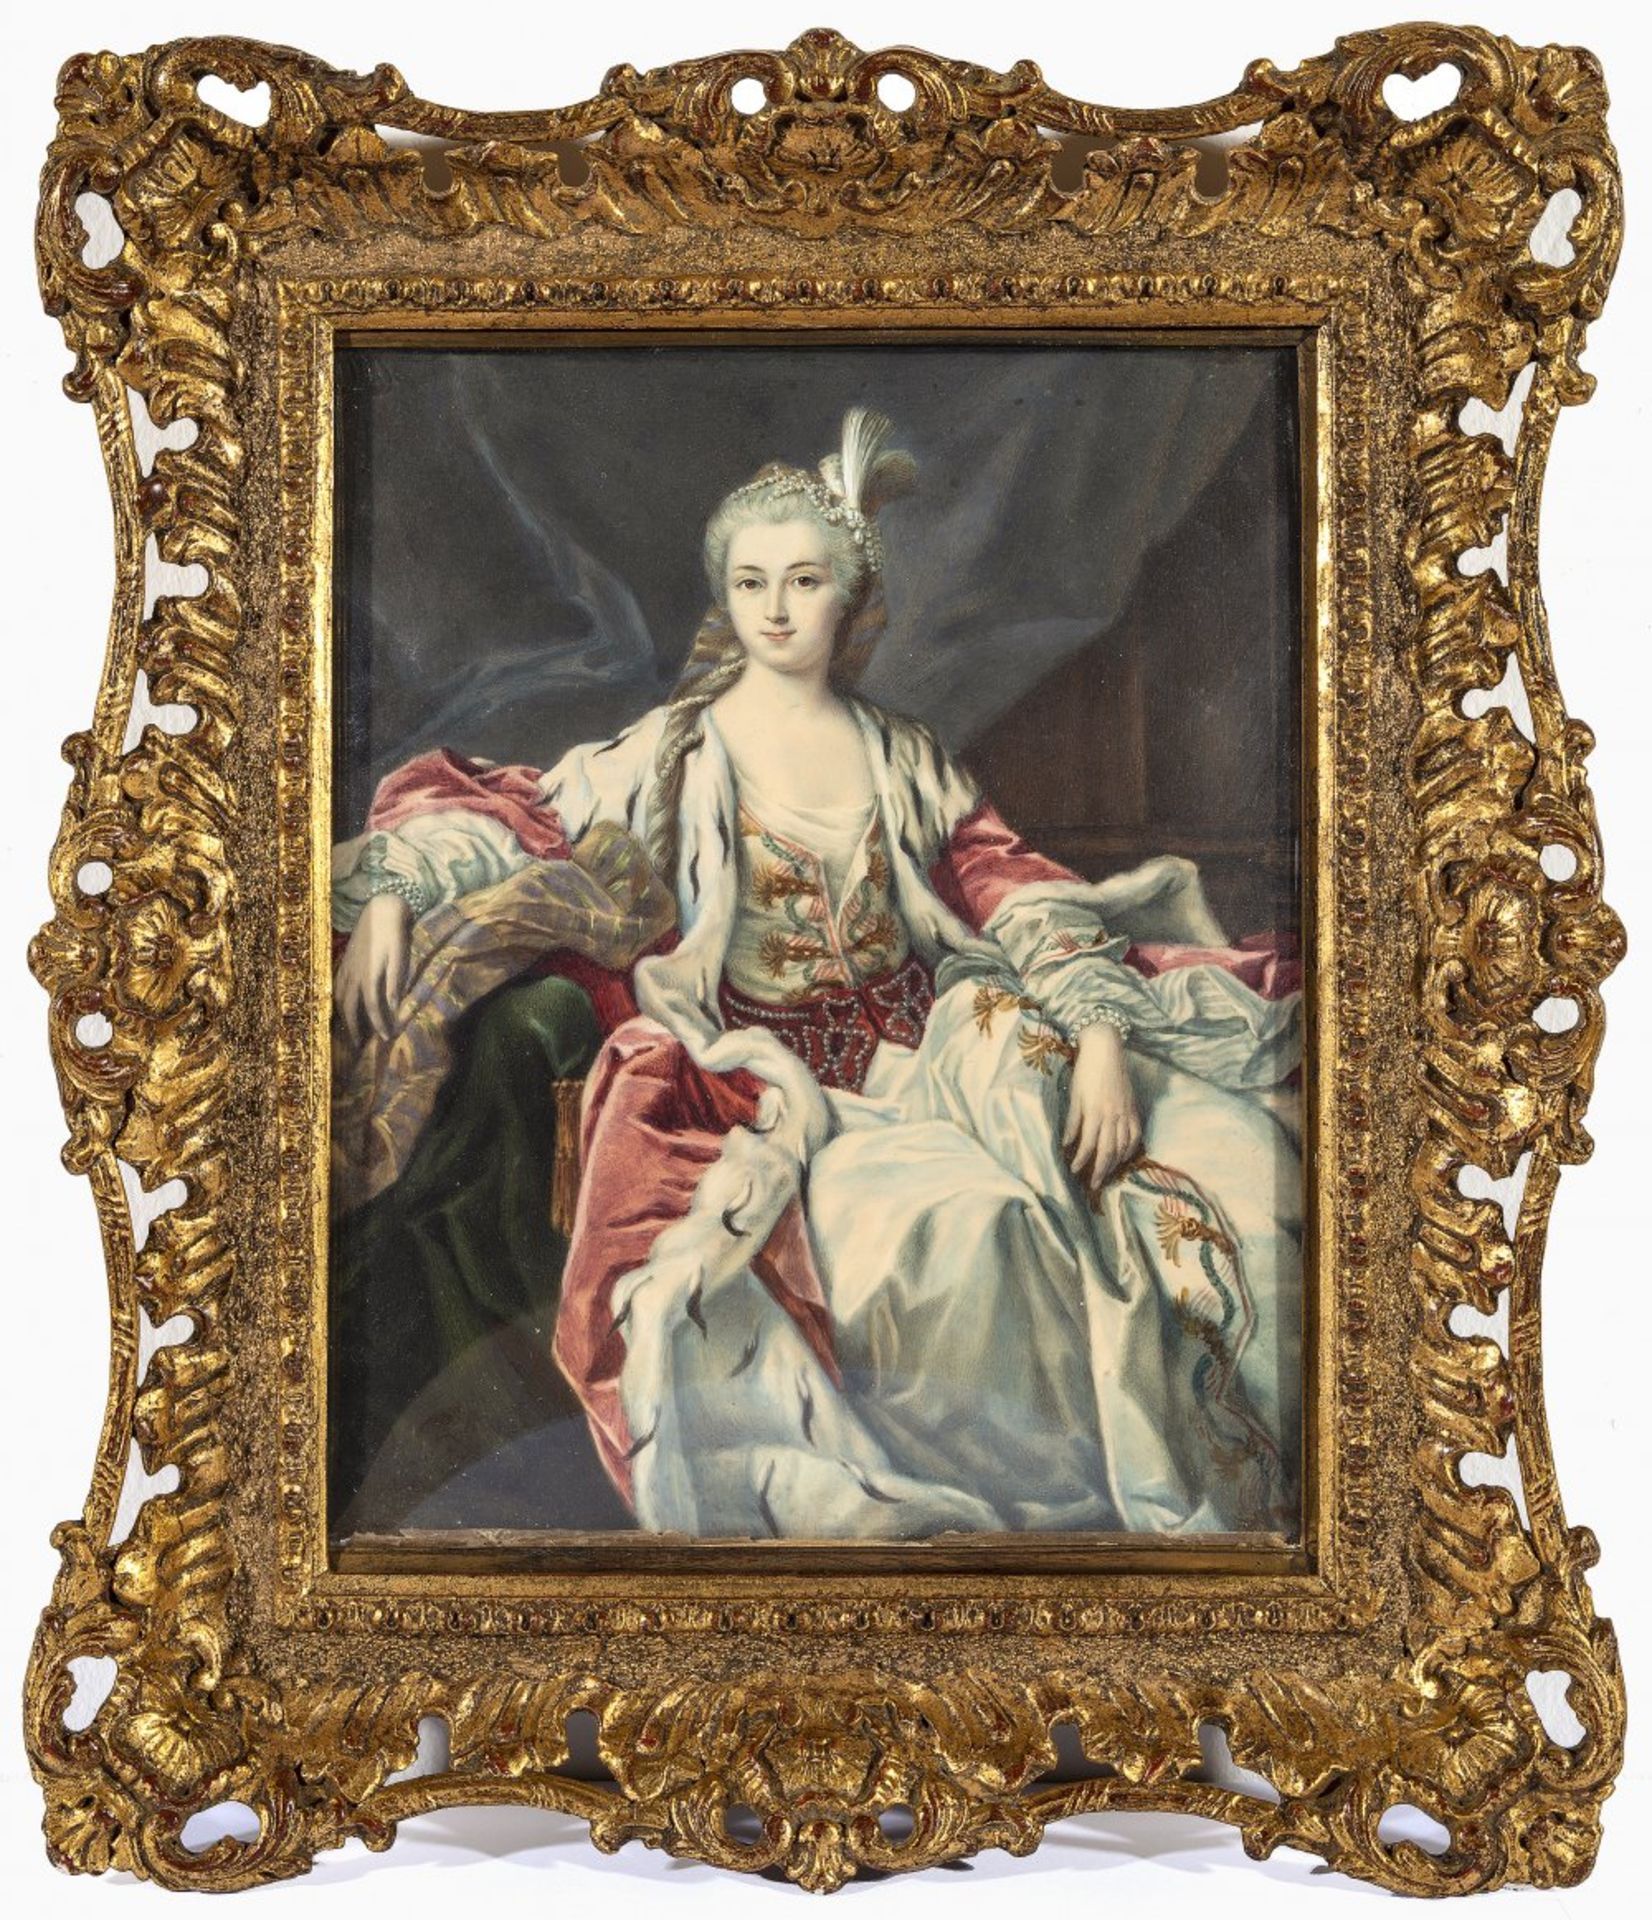 Probably France, late 18th century